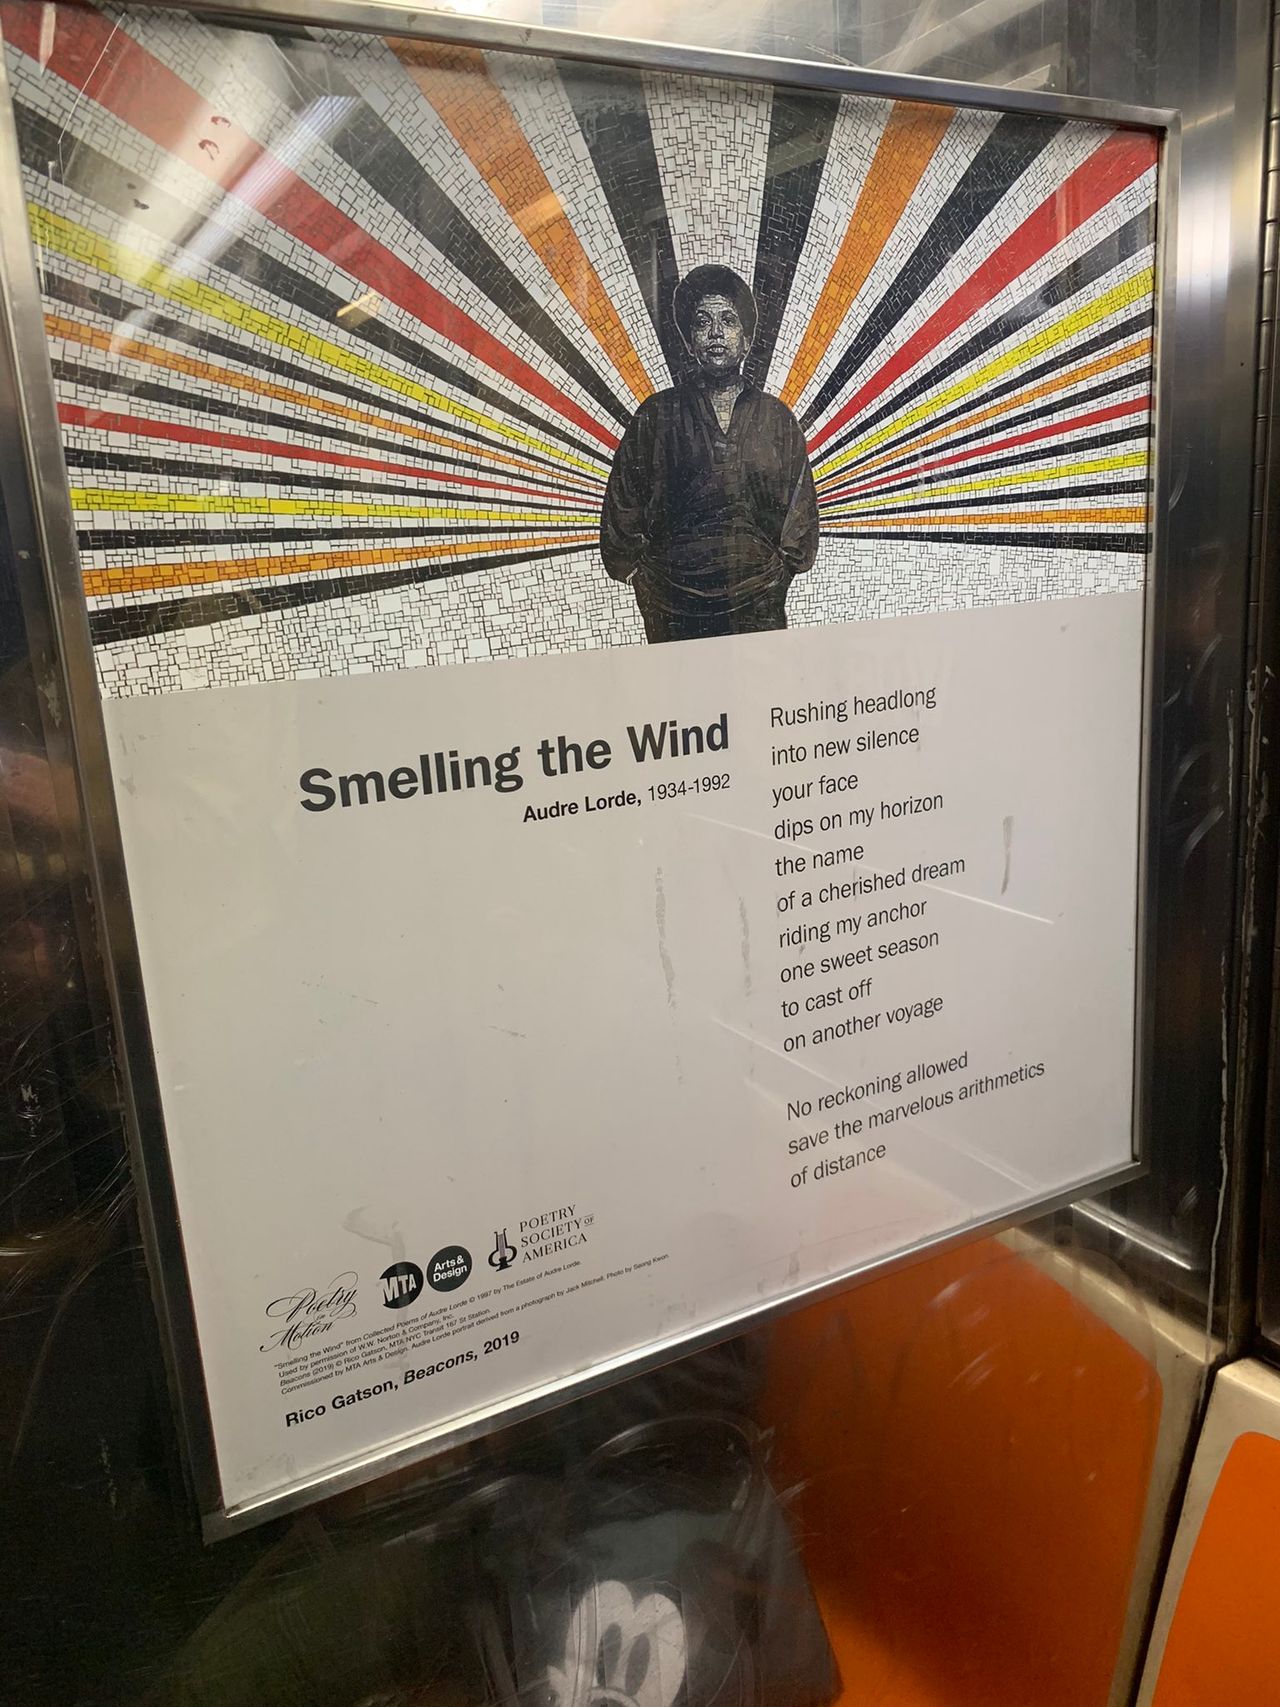 an Audre Lorde poem, 'Smelling the Wind' seen on the subway as part of the 'Poetry in Motion' series